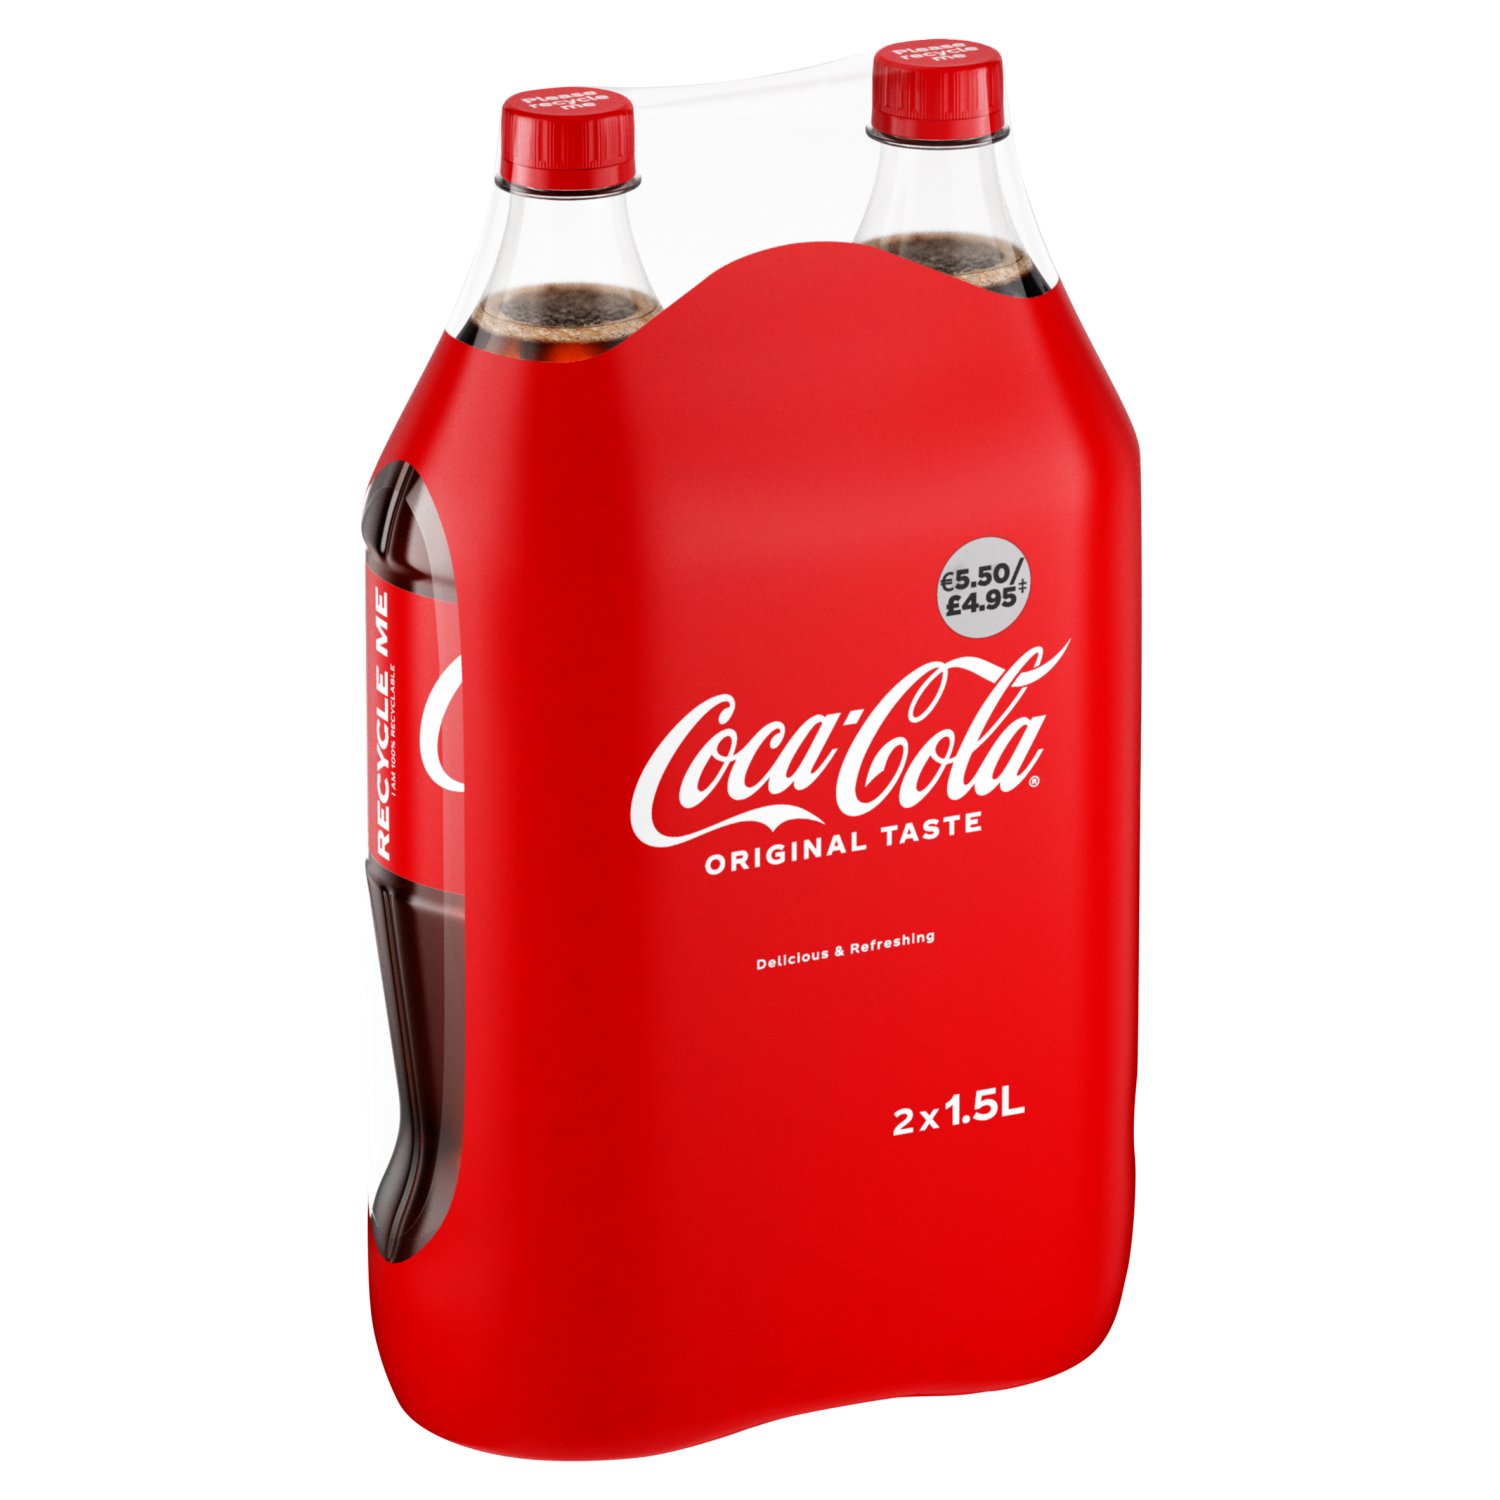 This pack is intended for sale as one complete unit.
This multipack contains 2 x 1.5L bottles.

©2023 The Coca-Cola Company